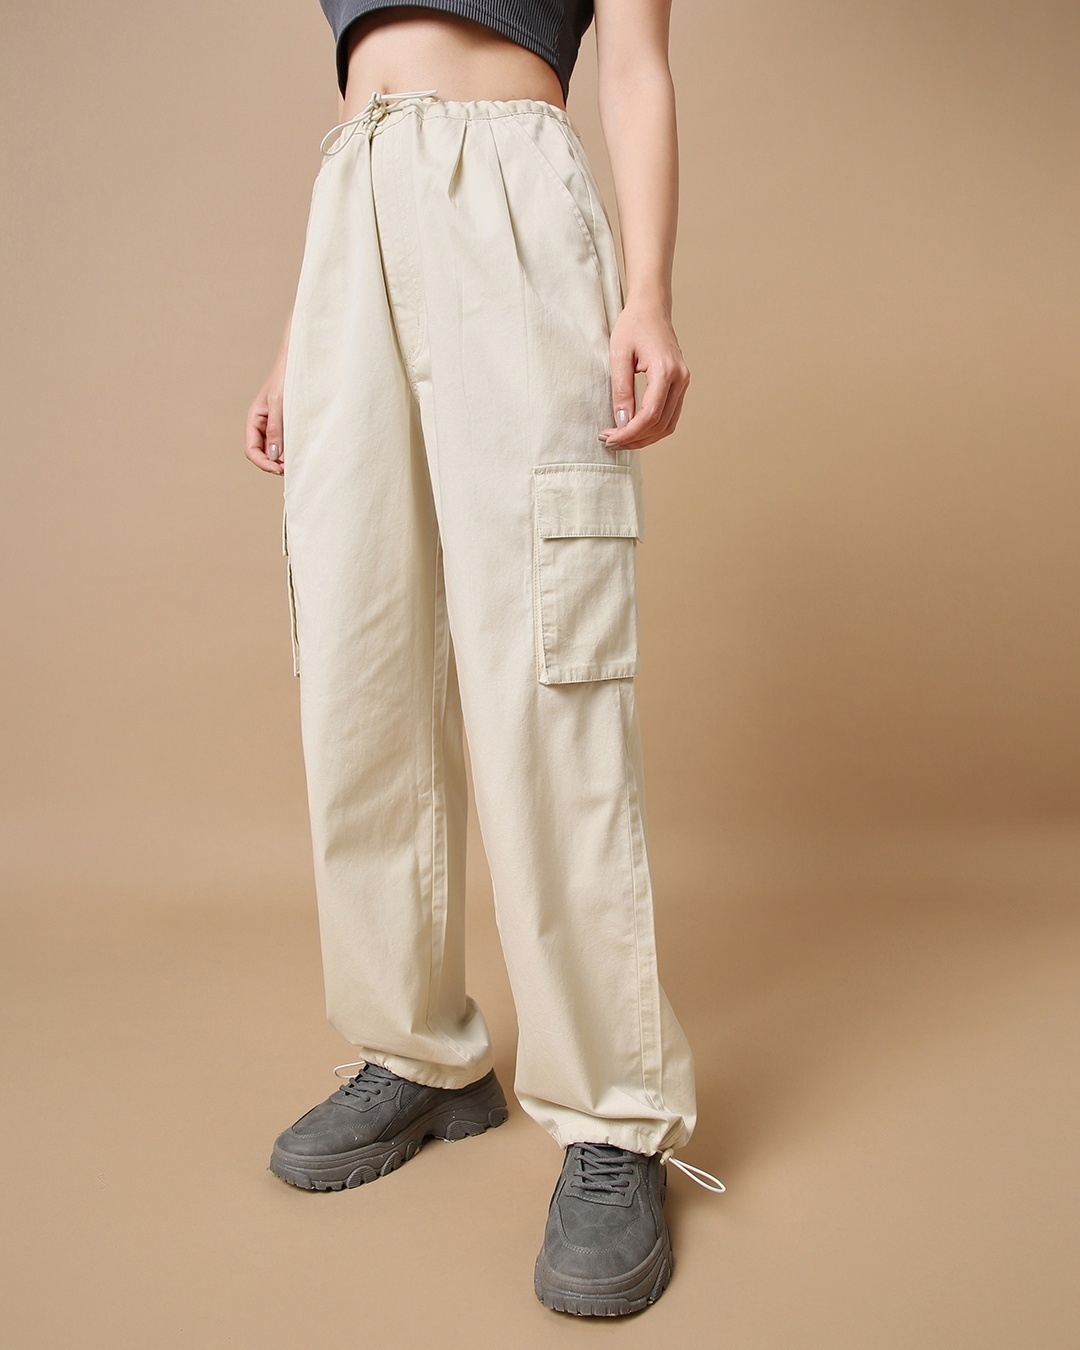 The Cool Chic Combo - Grey and White Cargo Pants – Wear Your Words